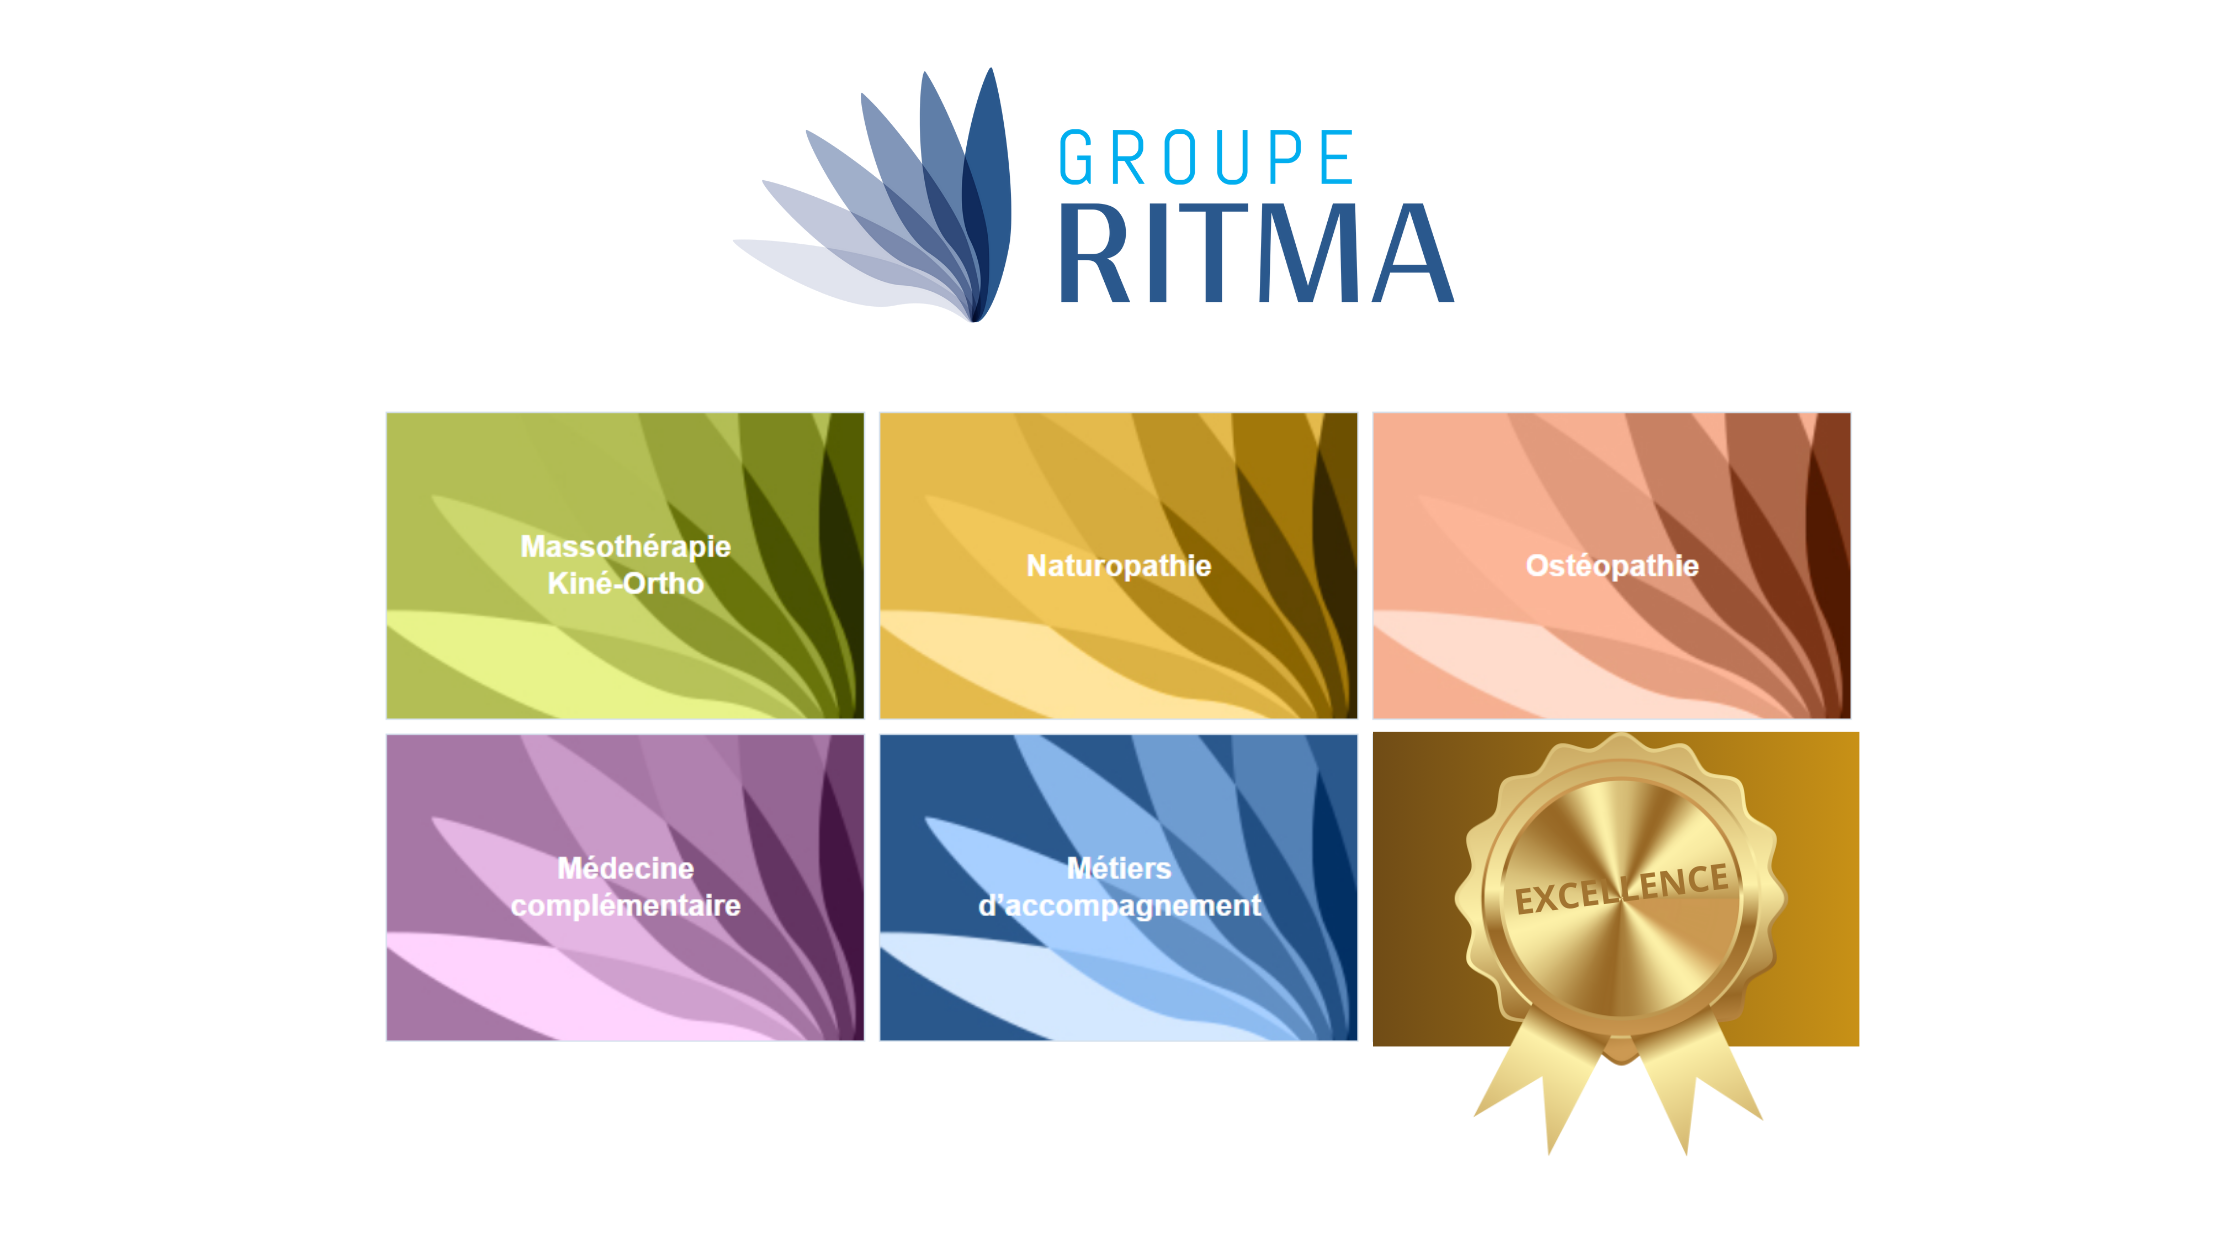 GROUPE RITMA, A GROUP IN ACTION